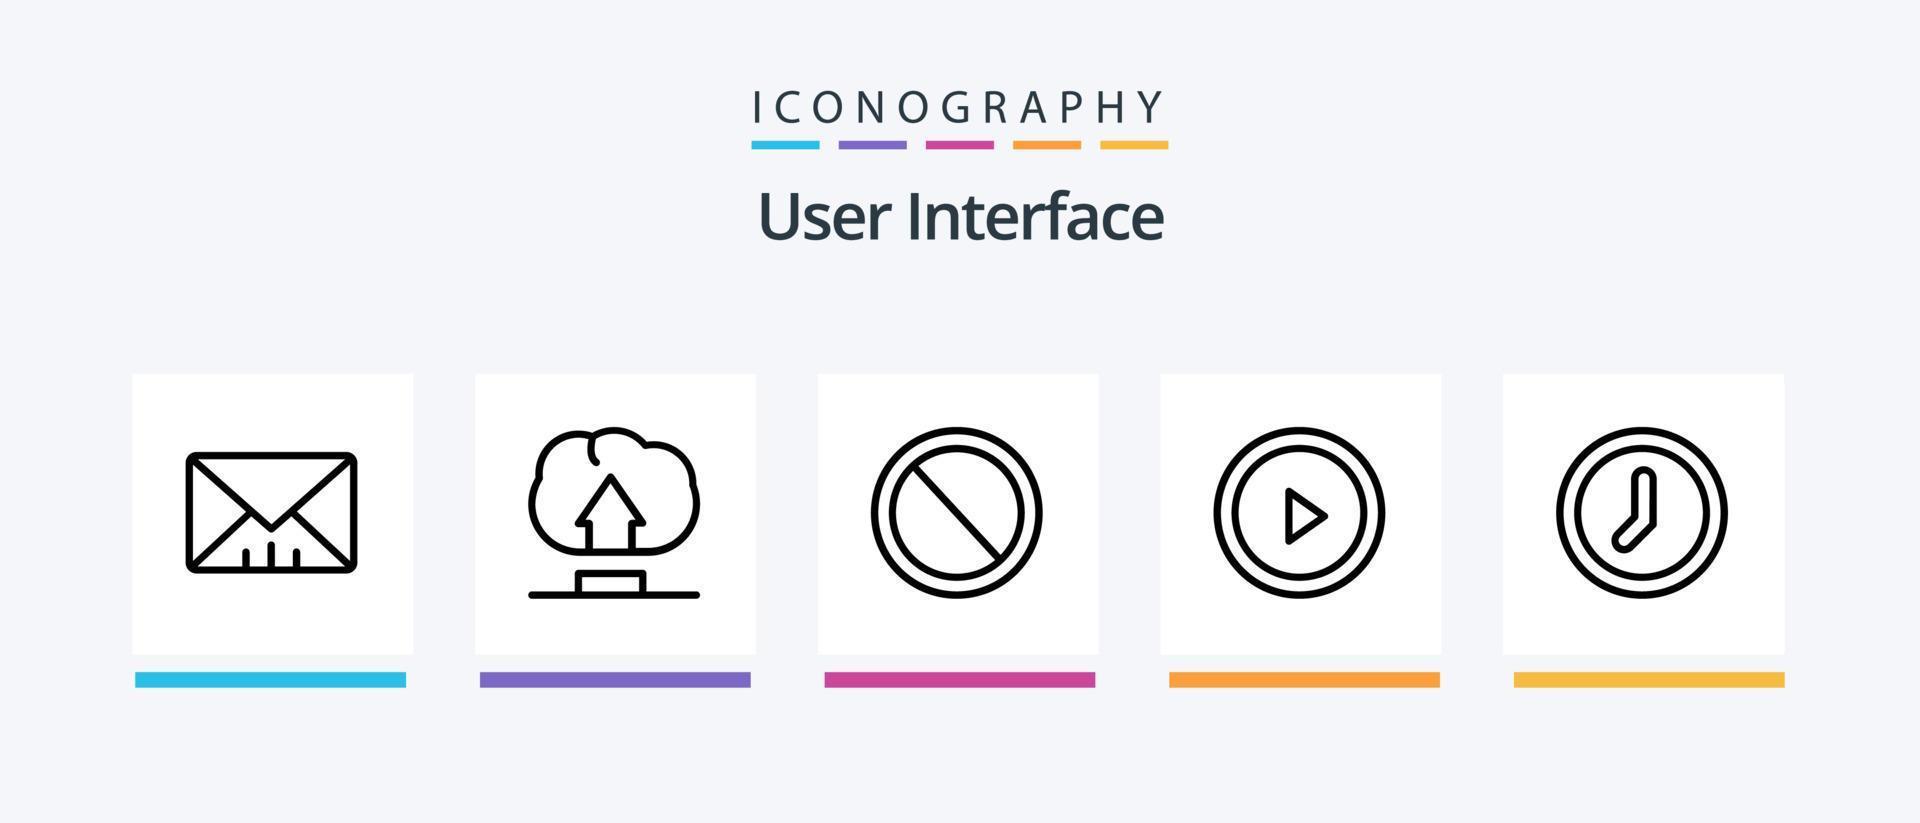 User Interface Line 5 Icon Pack Including user. interface. like. gear. upload. Creative Icons Design vector